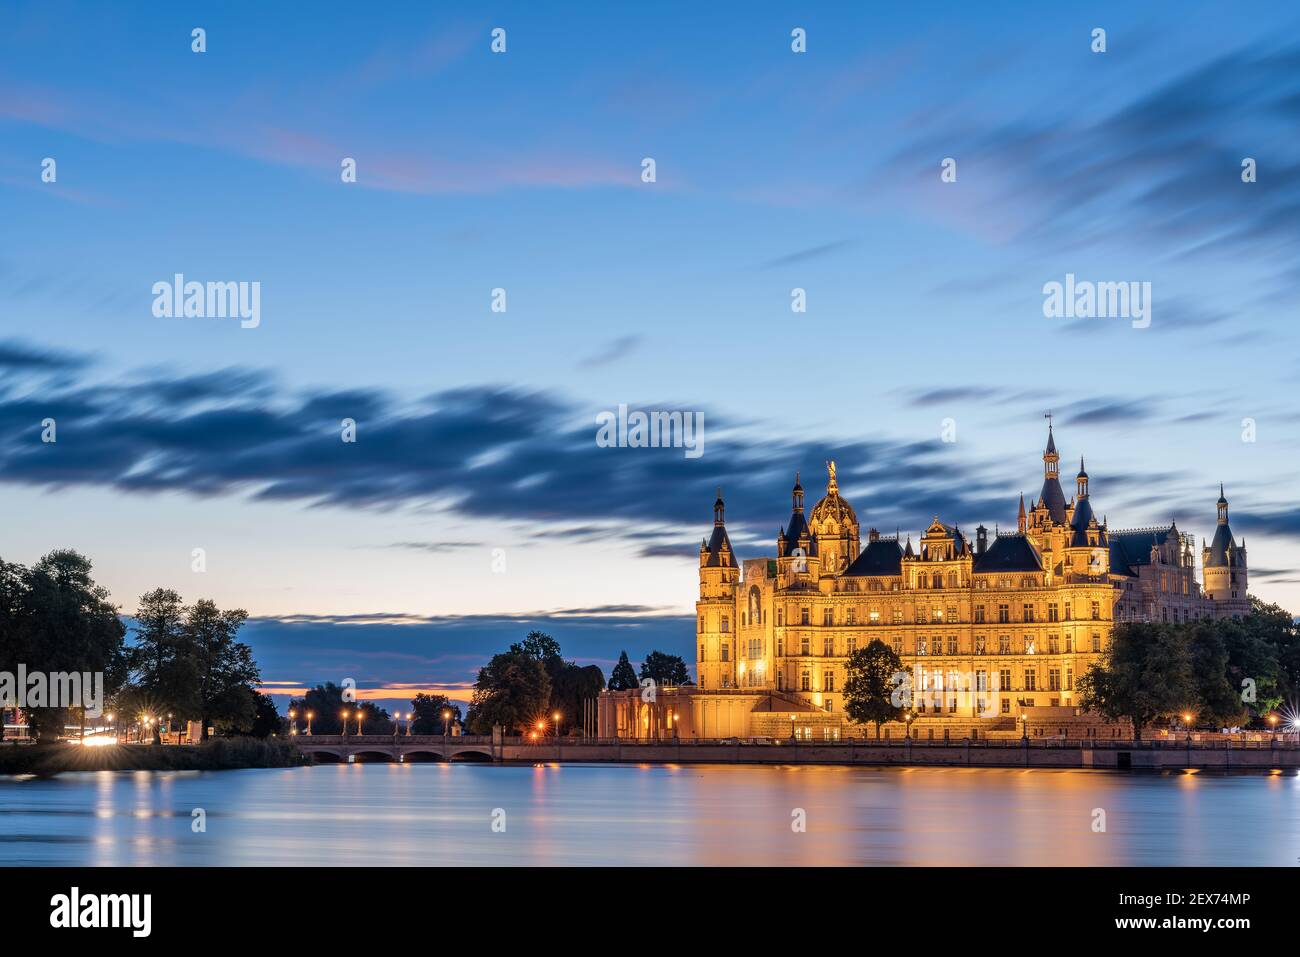 The Castle of Schwerin at sunrise Stock Photo